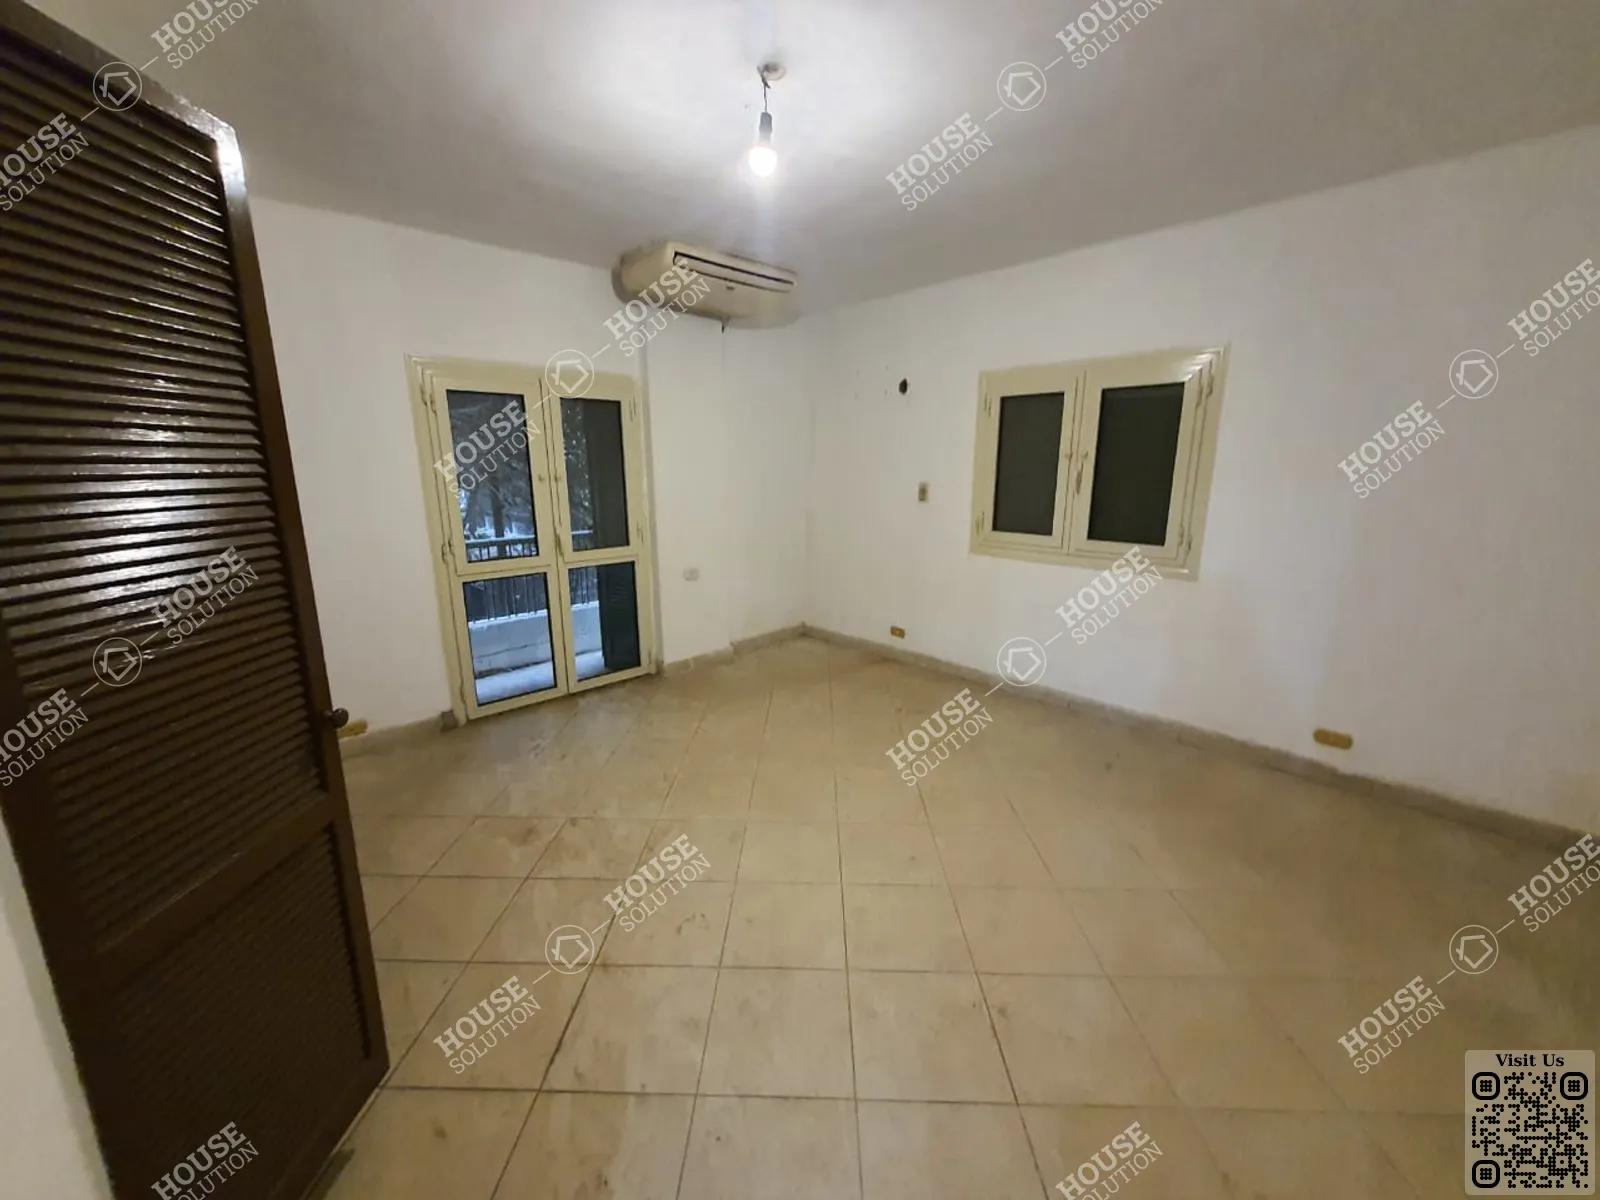 FIRST BEDROOM  @ Office spaces For Rent In Maadi Maadi Sarayat Area: 220 m² consists of 3 Bedrooms 2 Bathrooms Semi furnished 5 stars #5569-1